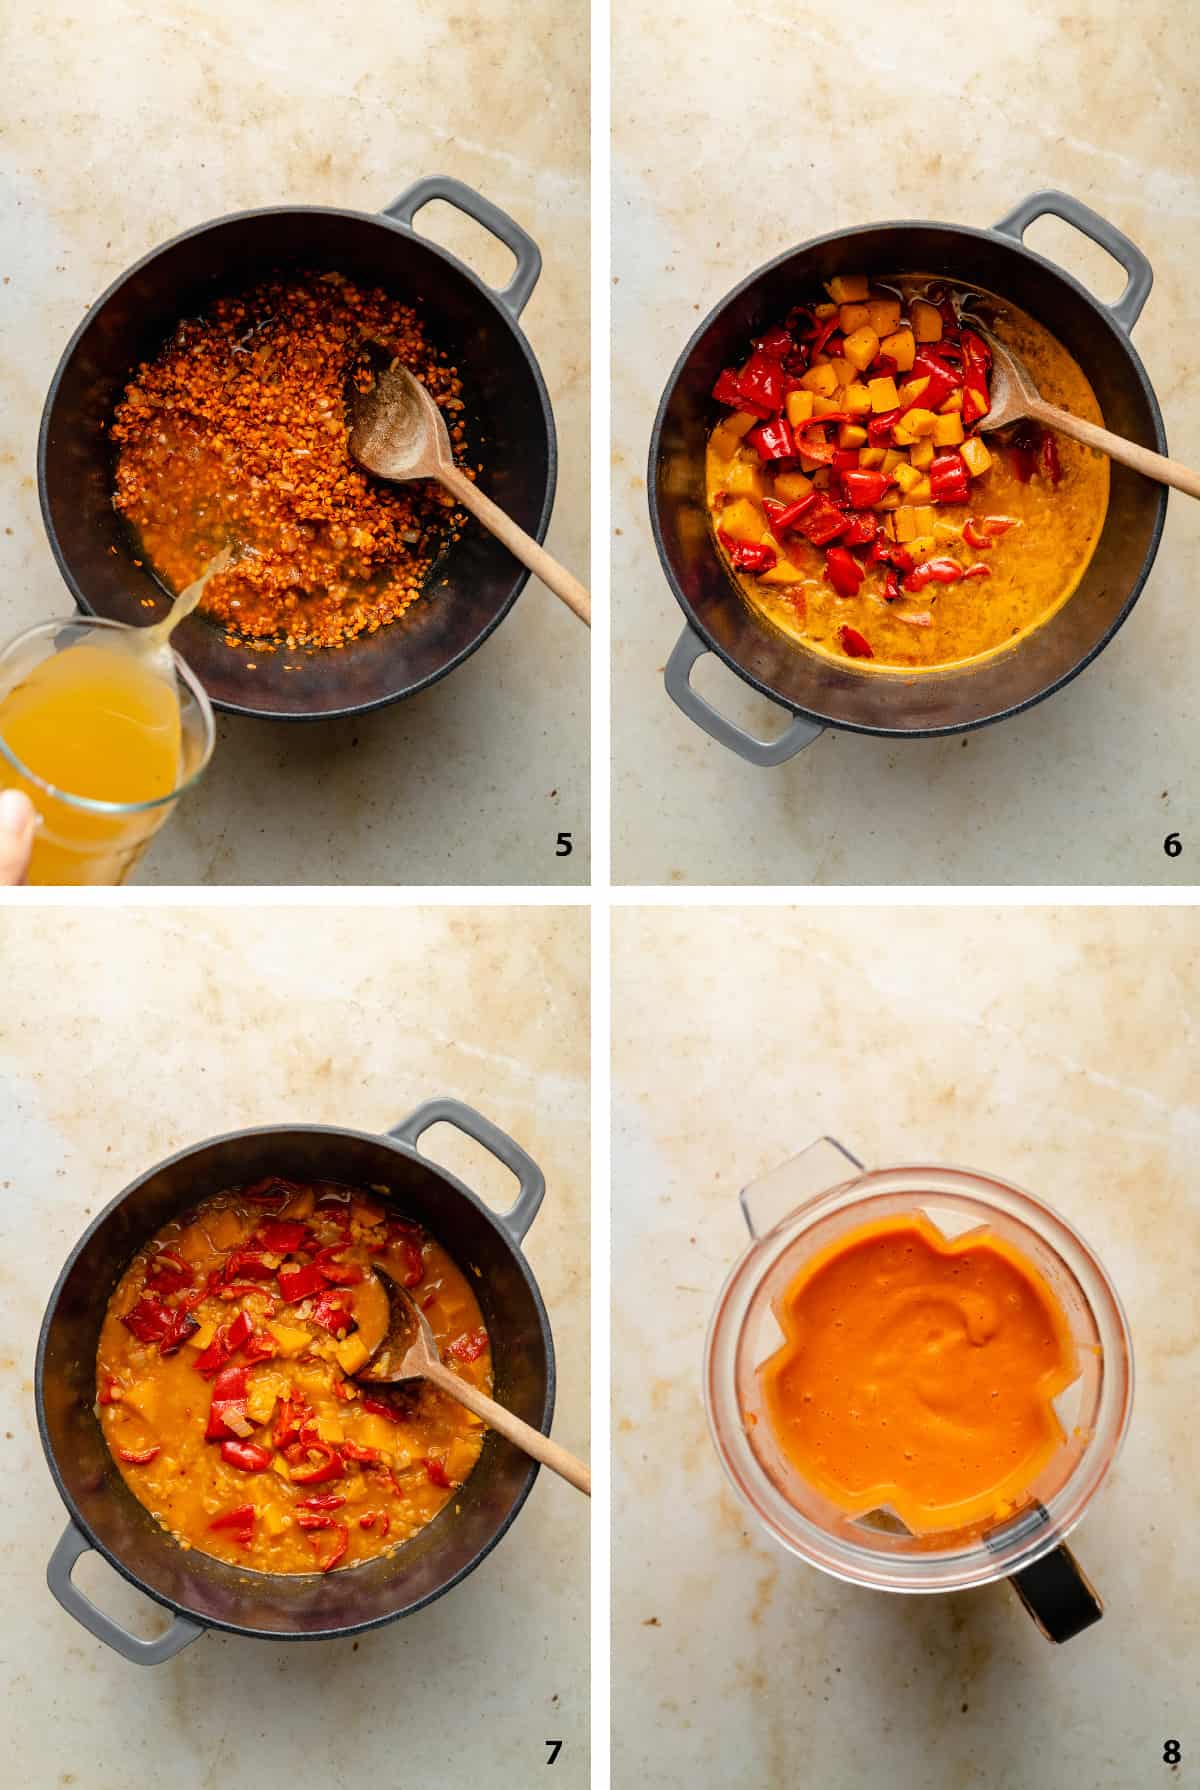 Step by step process of adding stock, simmering and blending the soup.